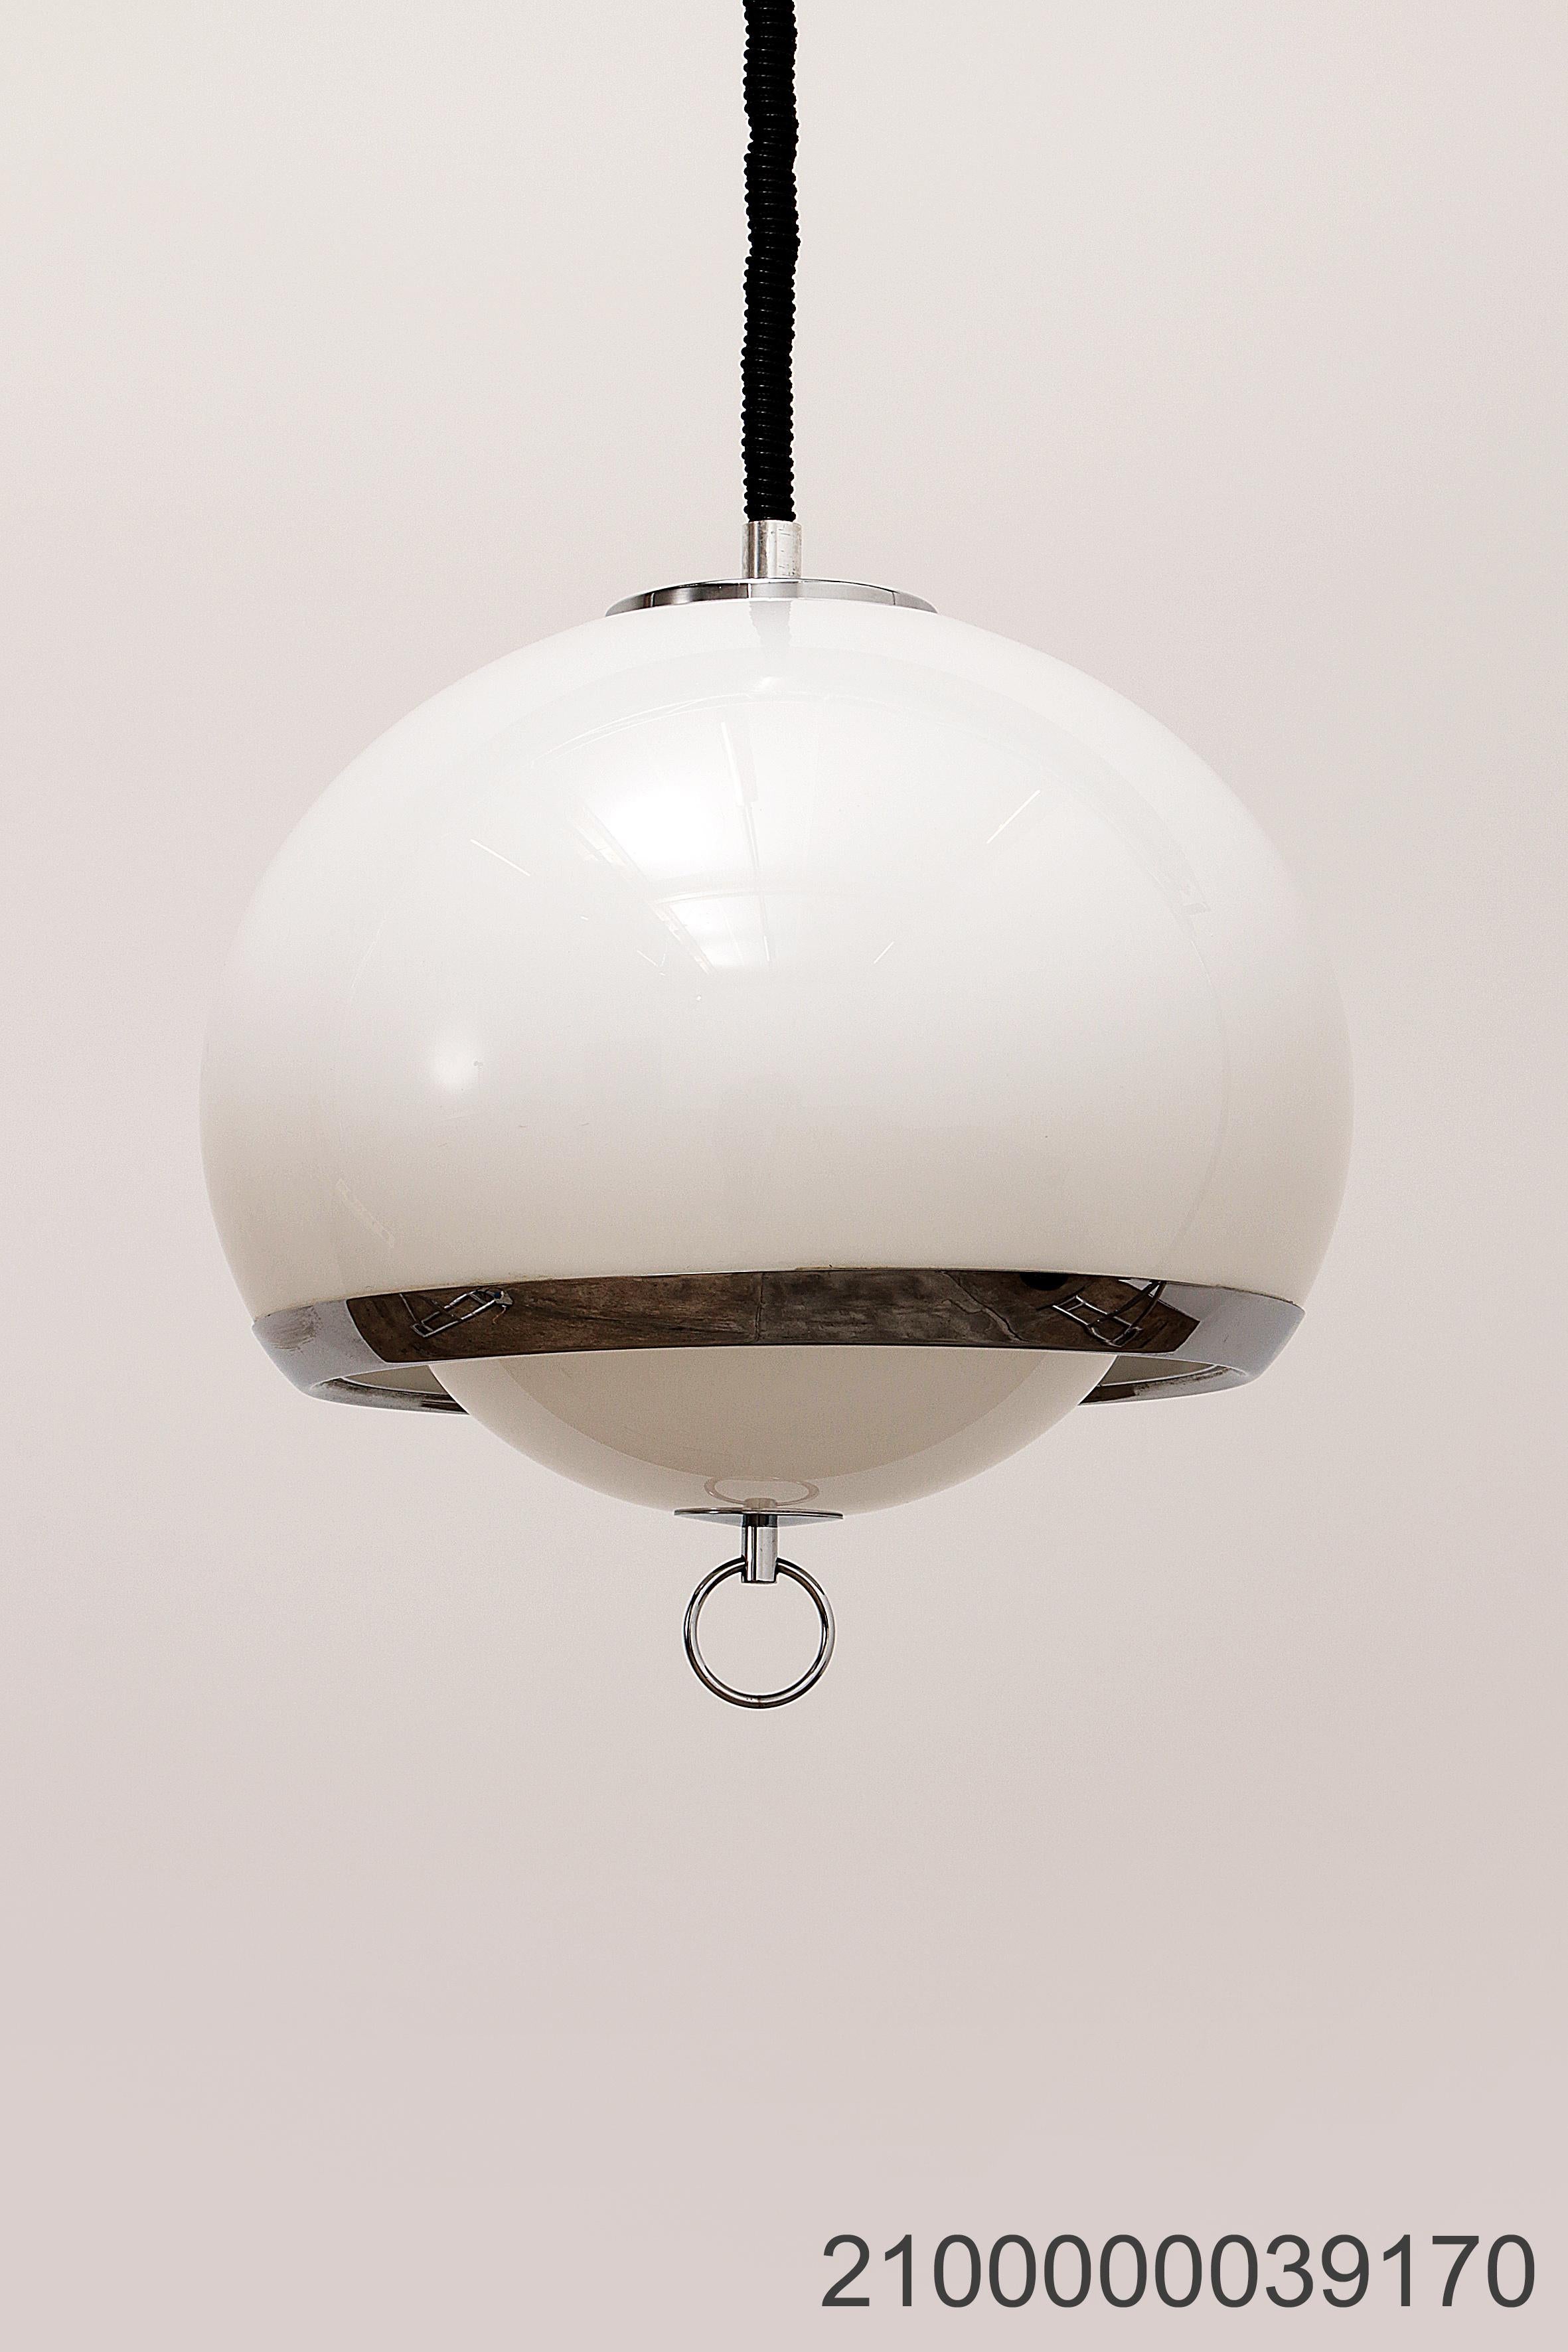 Chrome Opaline Space Age German Pendant Lamp with Harmonica Cord For Sale